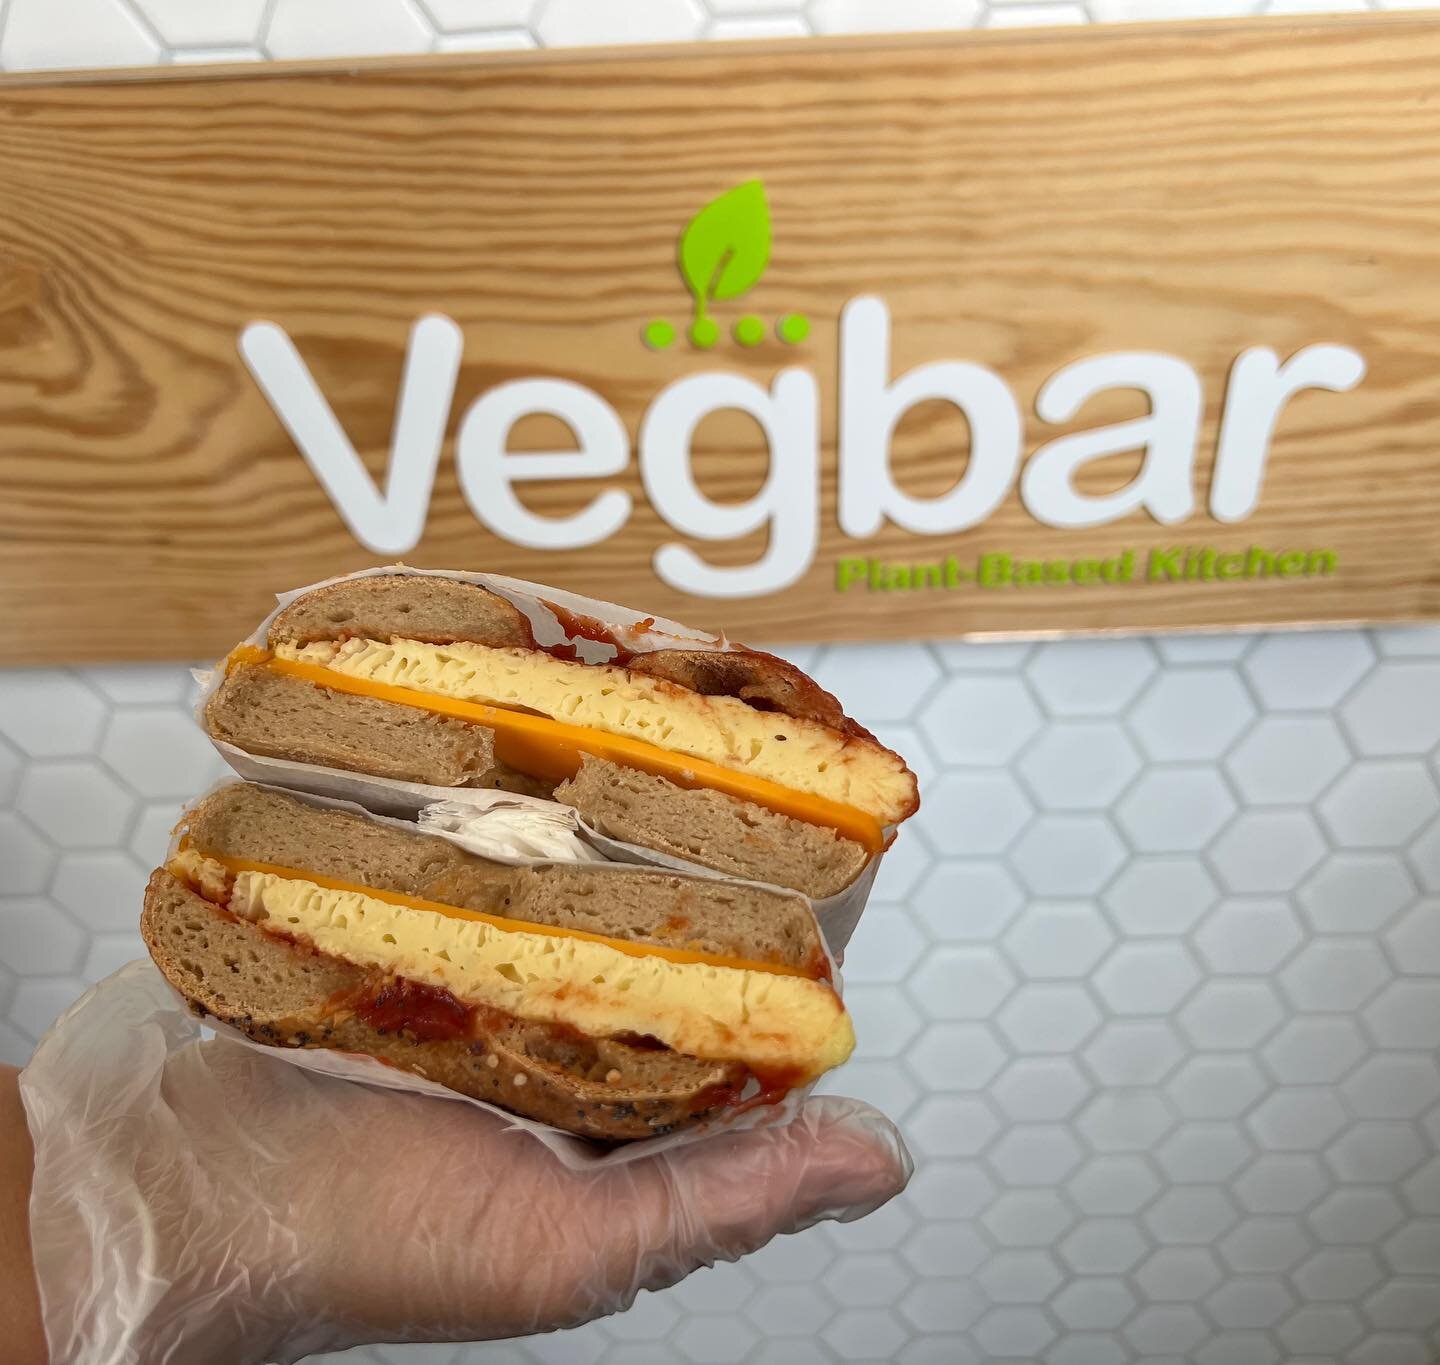 Vegan gluten free Egg and Cheese sammies on a delicious gluten free everything bagel. 

We are collaborating with VegBar and sharing the space! Come join us a for our soft opening this week at 464 Newark street in Hoboken. 

#glutenfree #veganglutenf